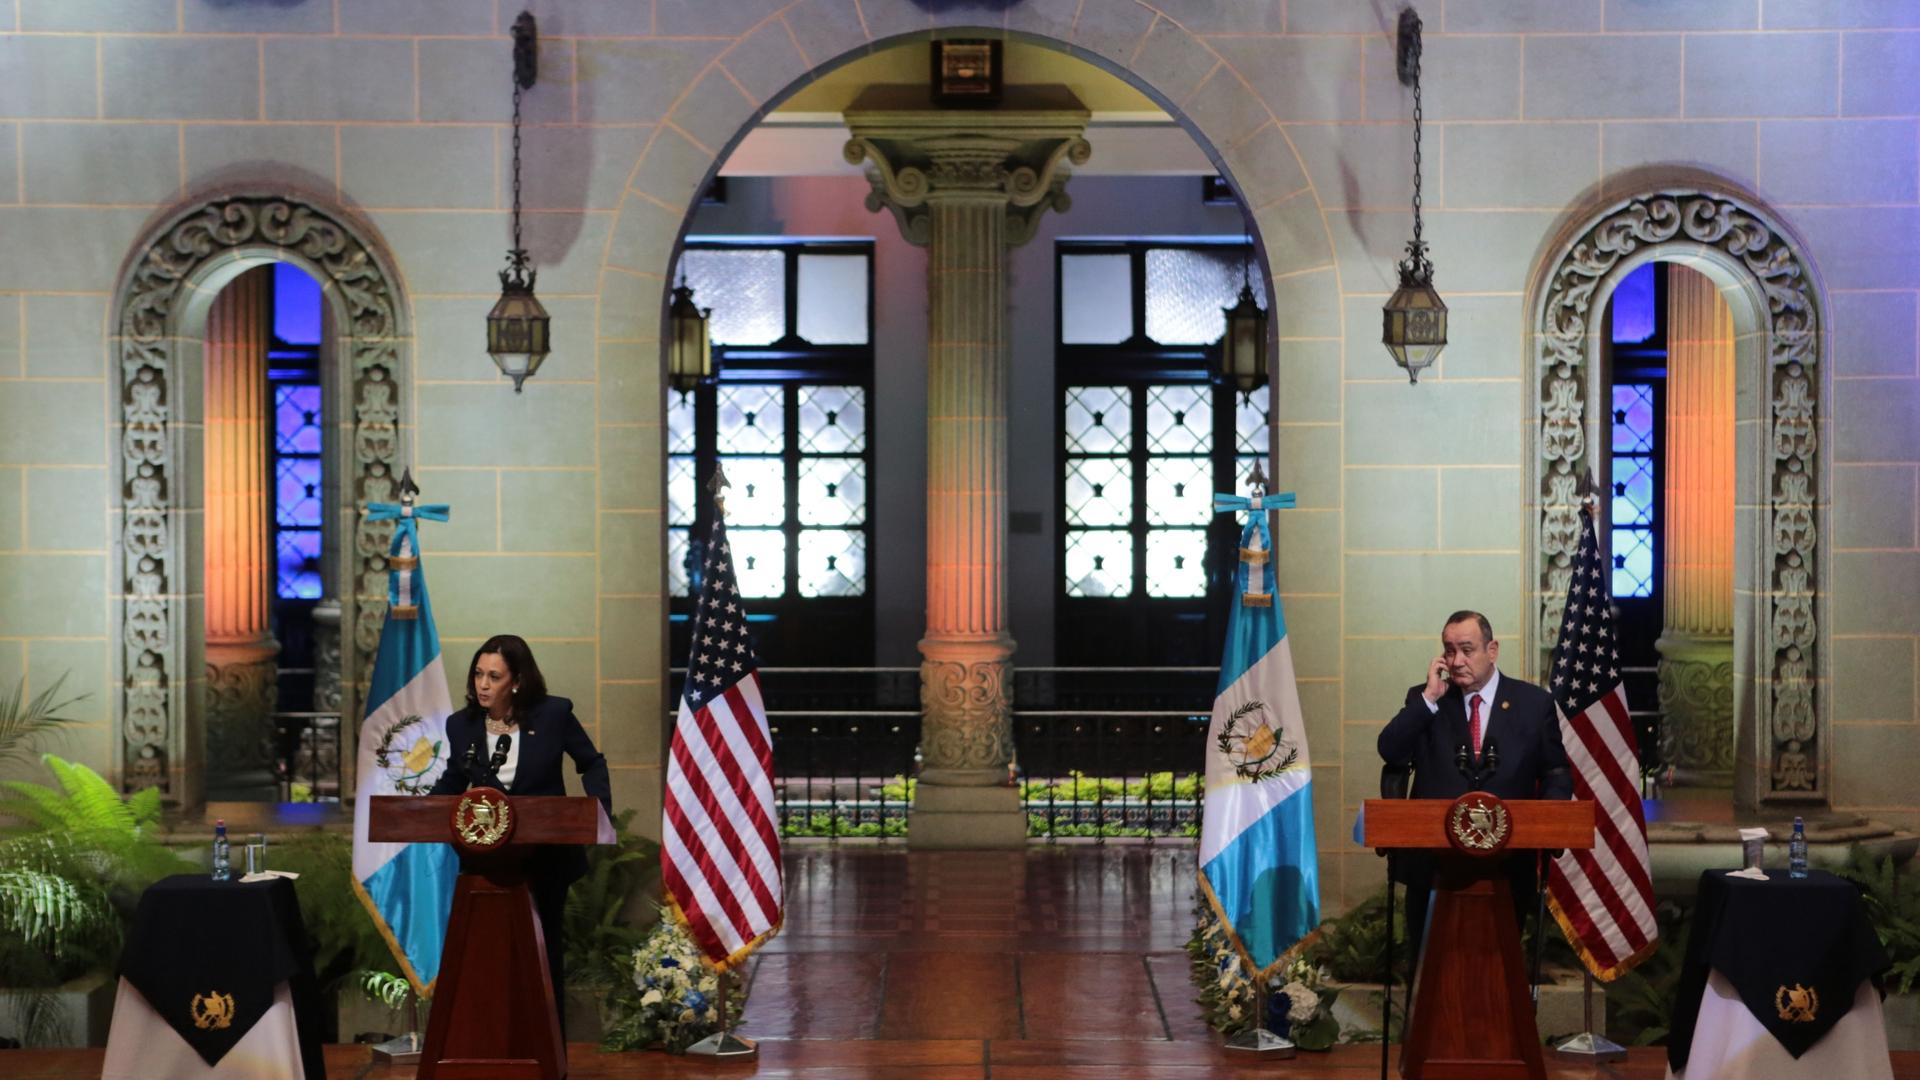 Harris at the podium in Guatemala on a diplomatic visit